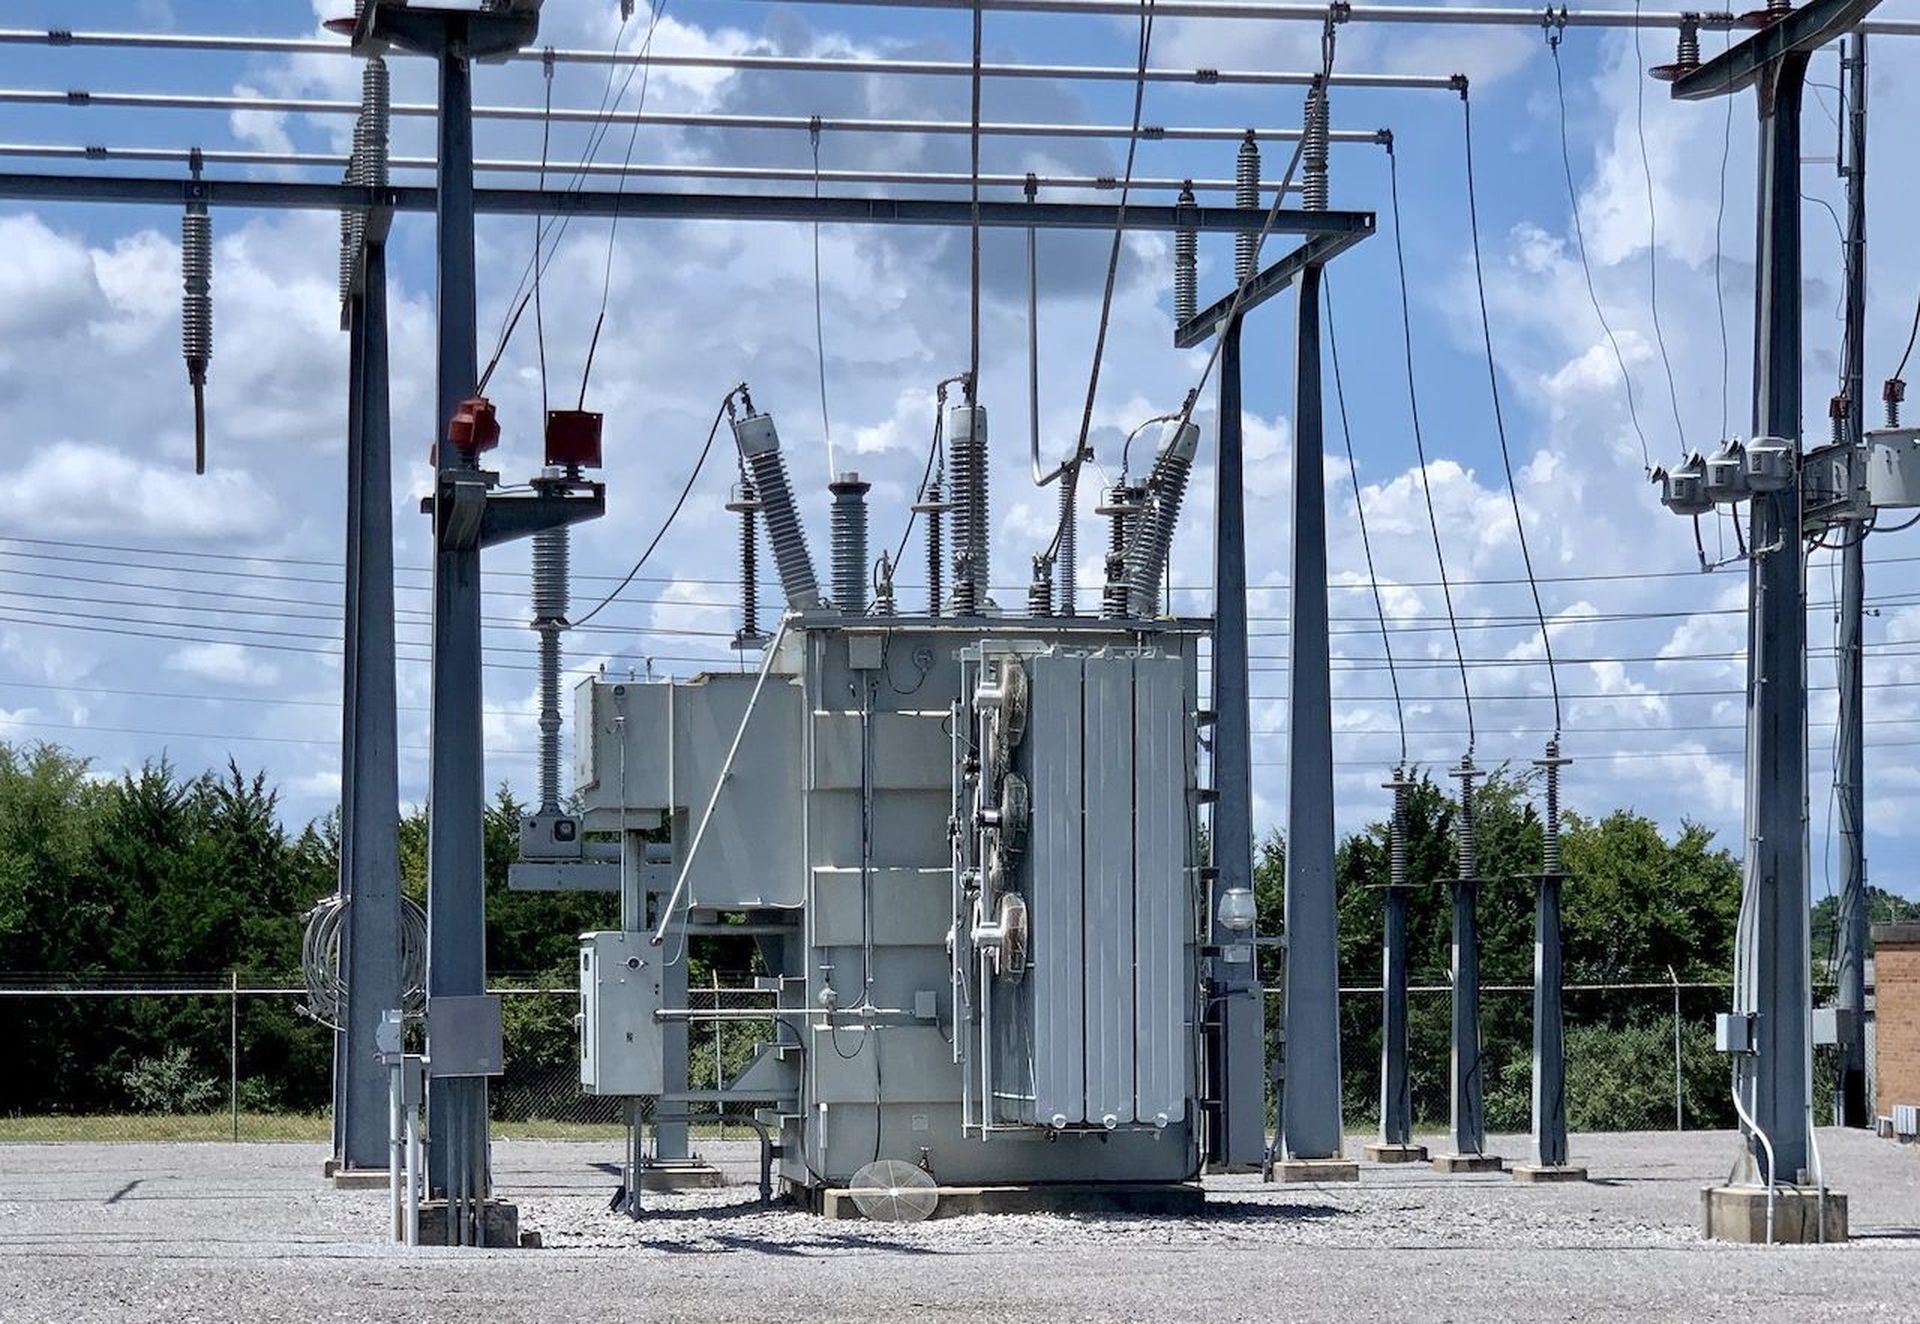 Today’s columnist, Elad Ben-Meir of SCADAfence, writes that the attack on the water treatment plant in Oldsmar, Fla.,was a “wake-up call” and that all public utilities have to get serious about securing critical infrastructure.